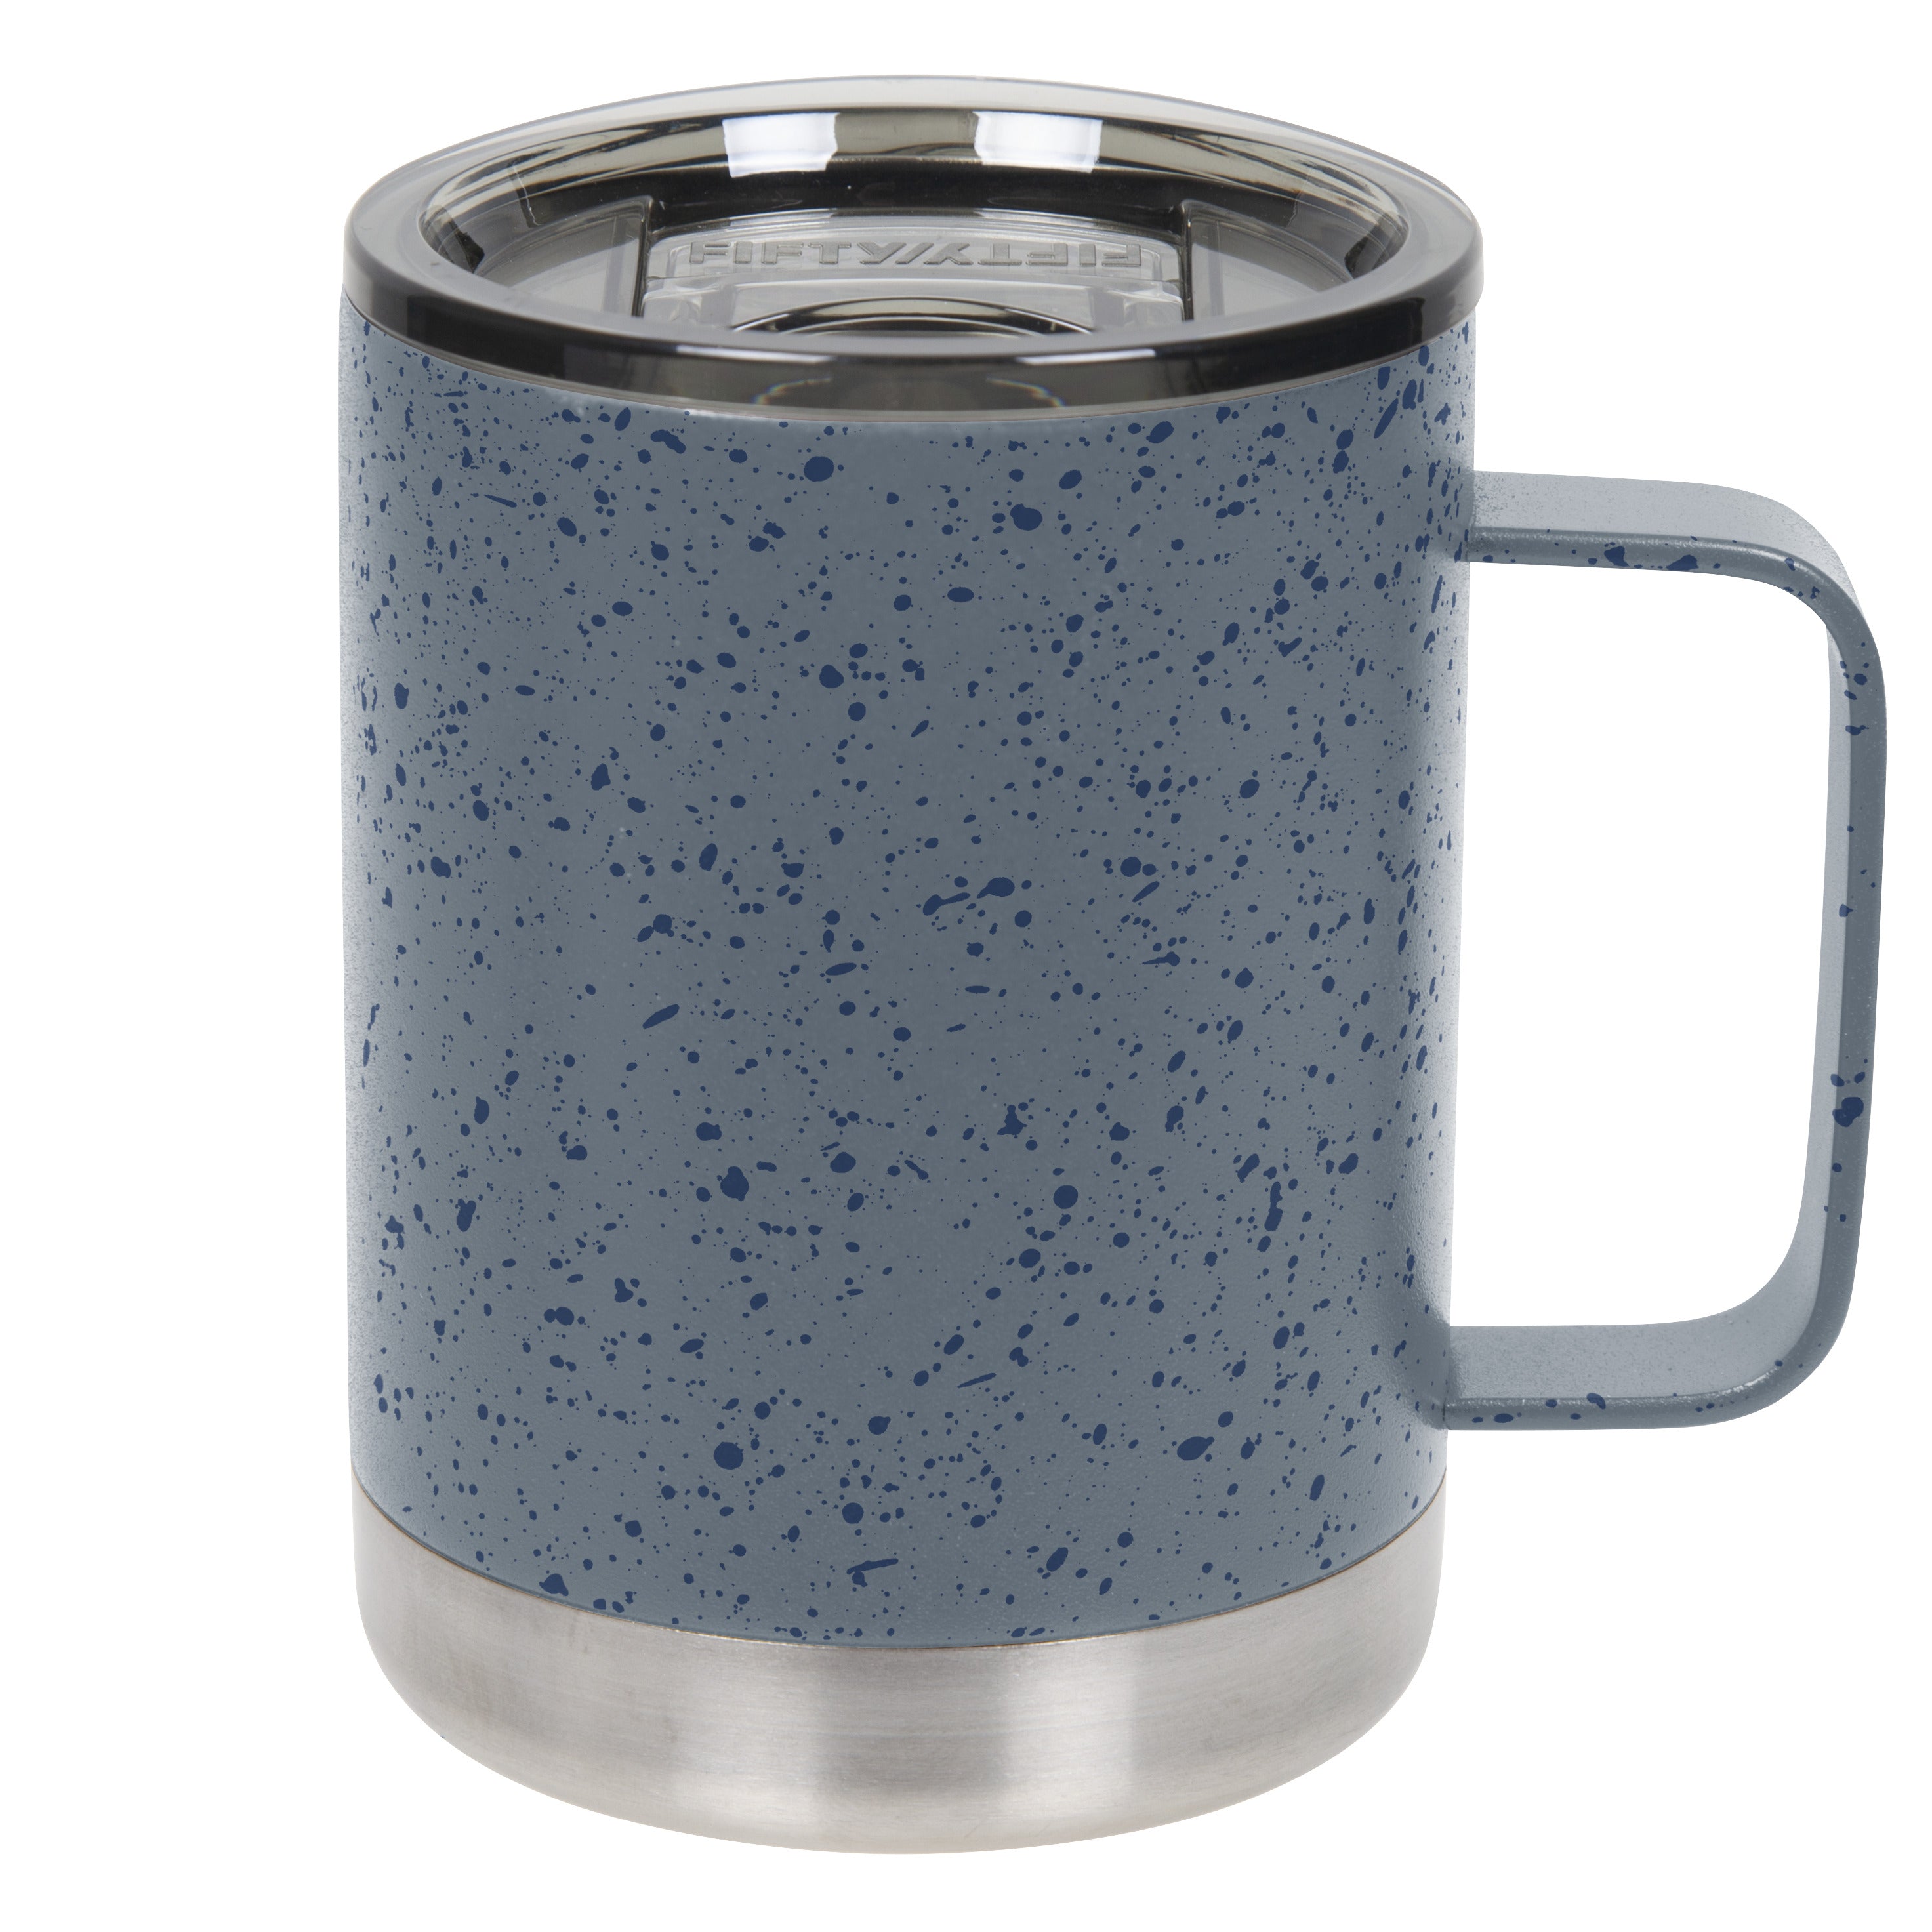 Ello Campy Vacuum-Insulated Stainless Steel Travel Mug, 18-Ounce 